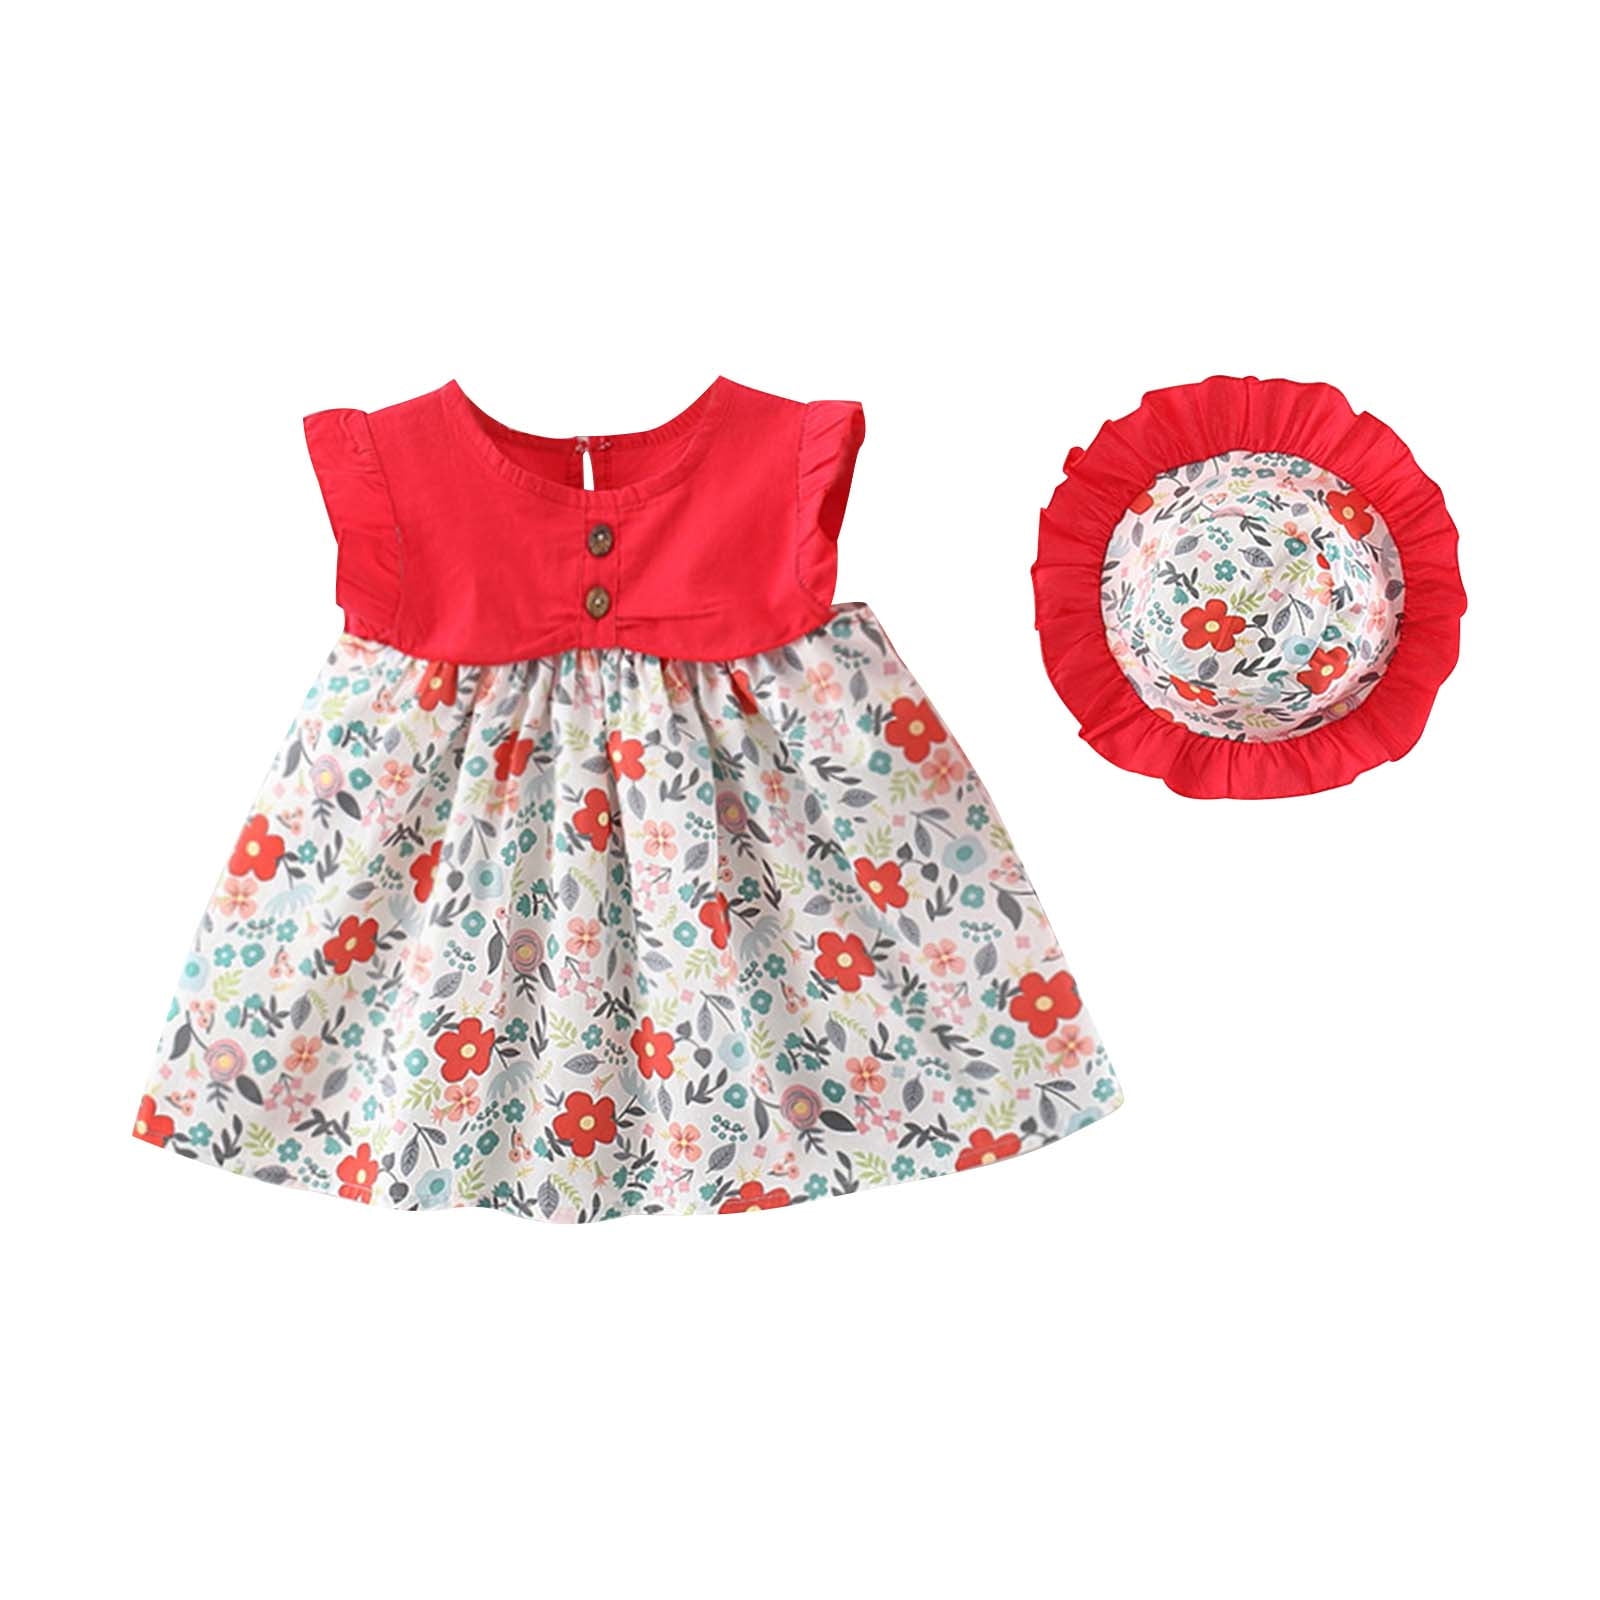 Striped Double Layer Flower Princess Skirt Baby Blue Dress For Baby Girls  Perfect For Summer From Greatamy, $6.16